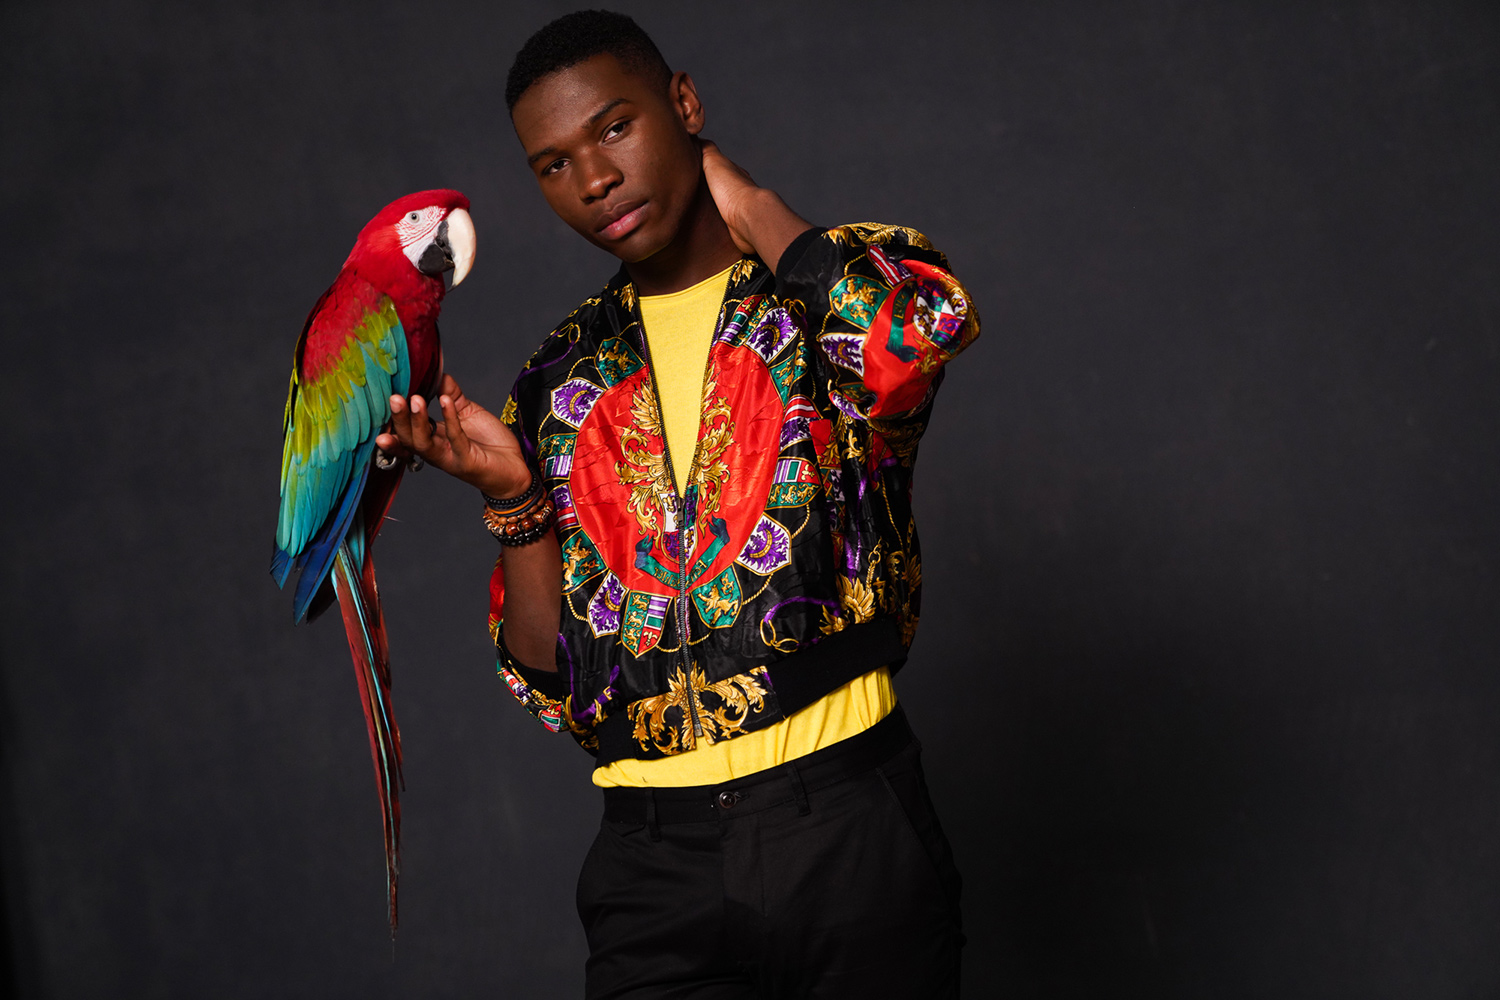 man in colorful jacket with macaw